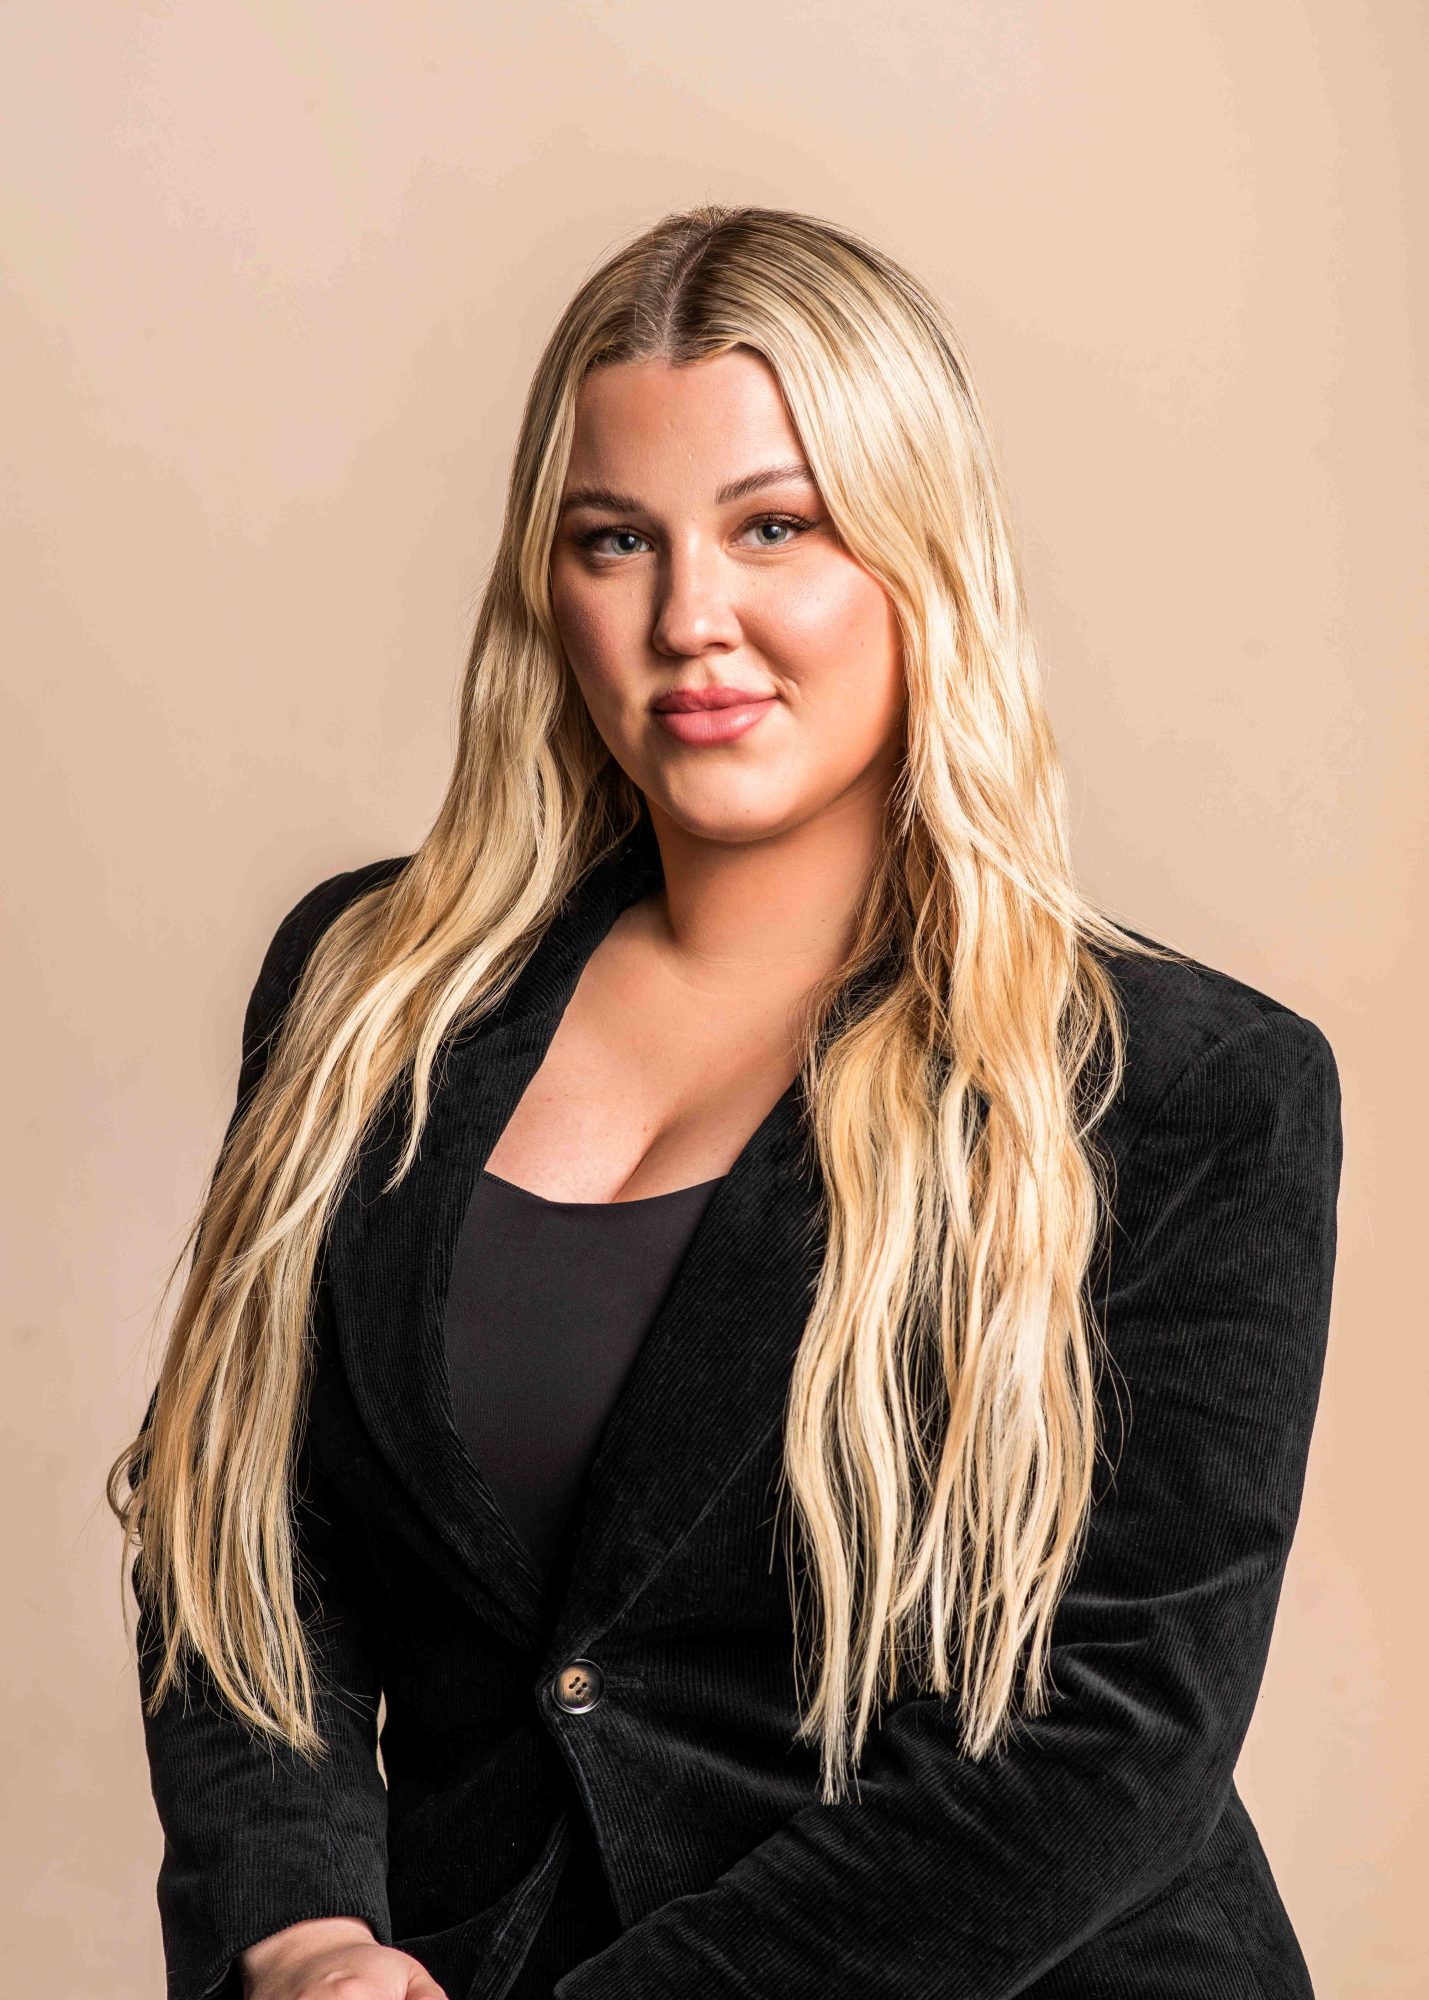 Mallory Greene headshot with long blonde hair against a beige backdrop. She is wearing a black blazer and shirt.